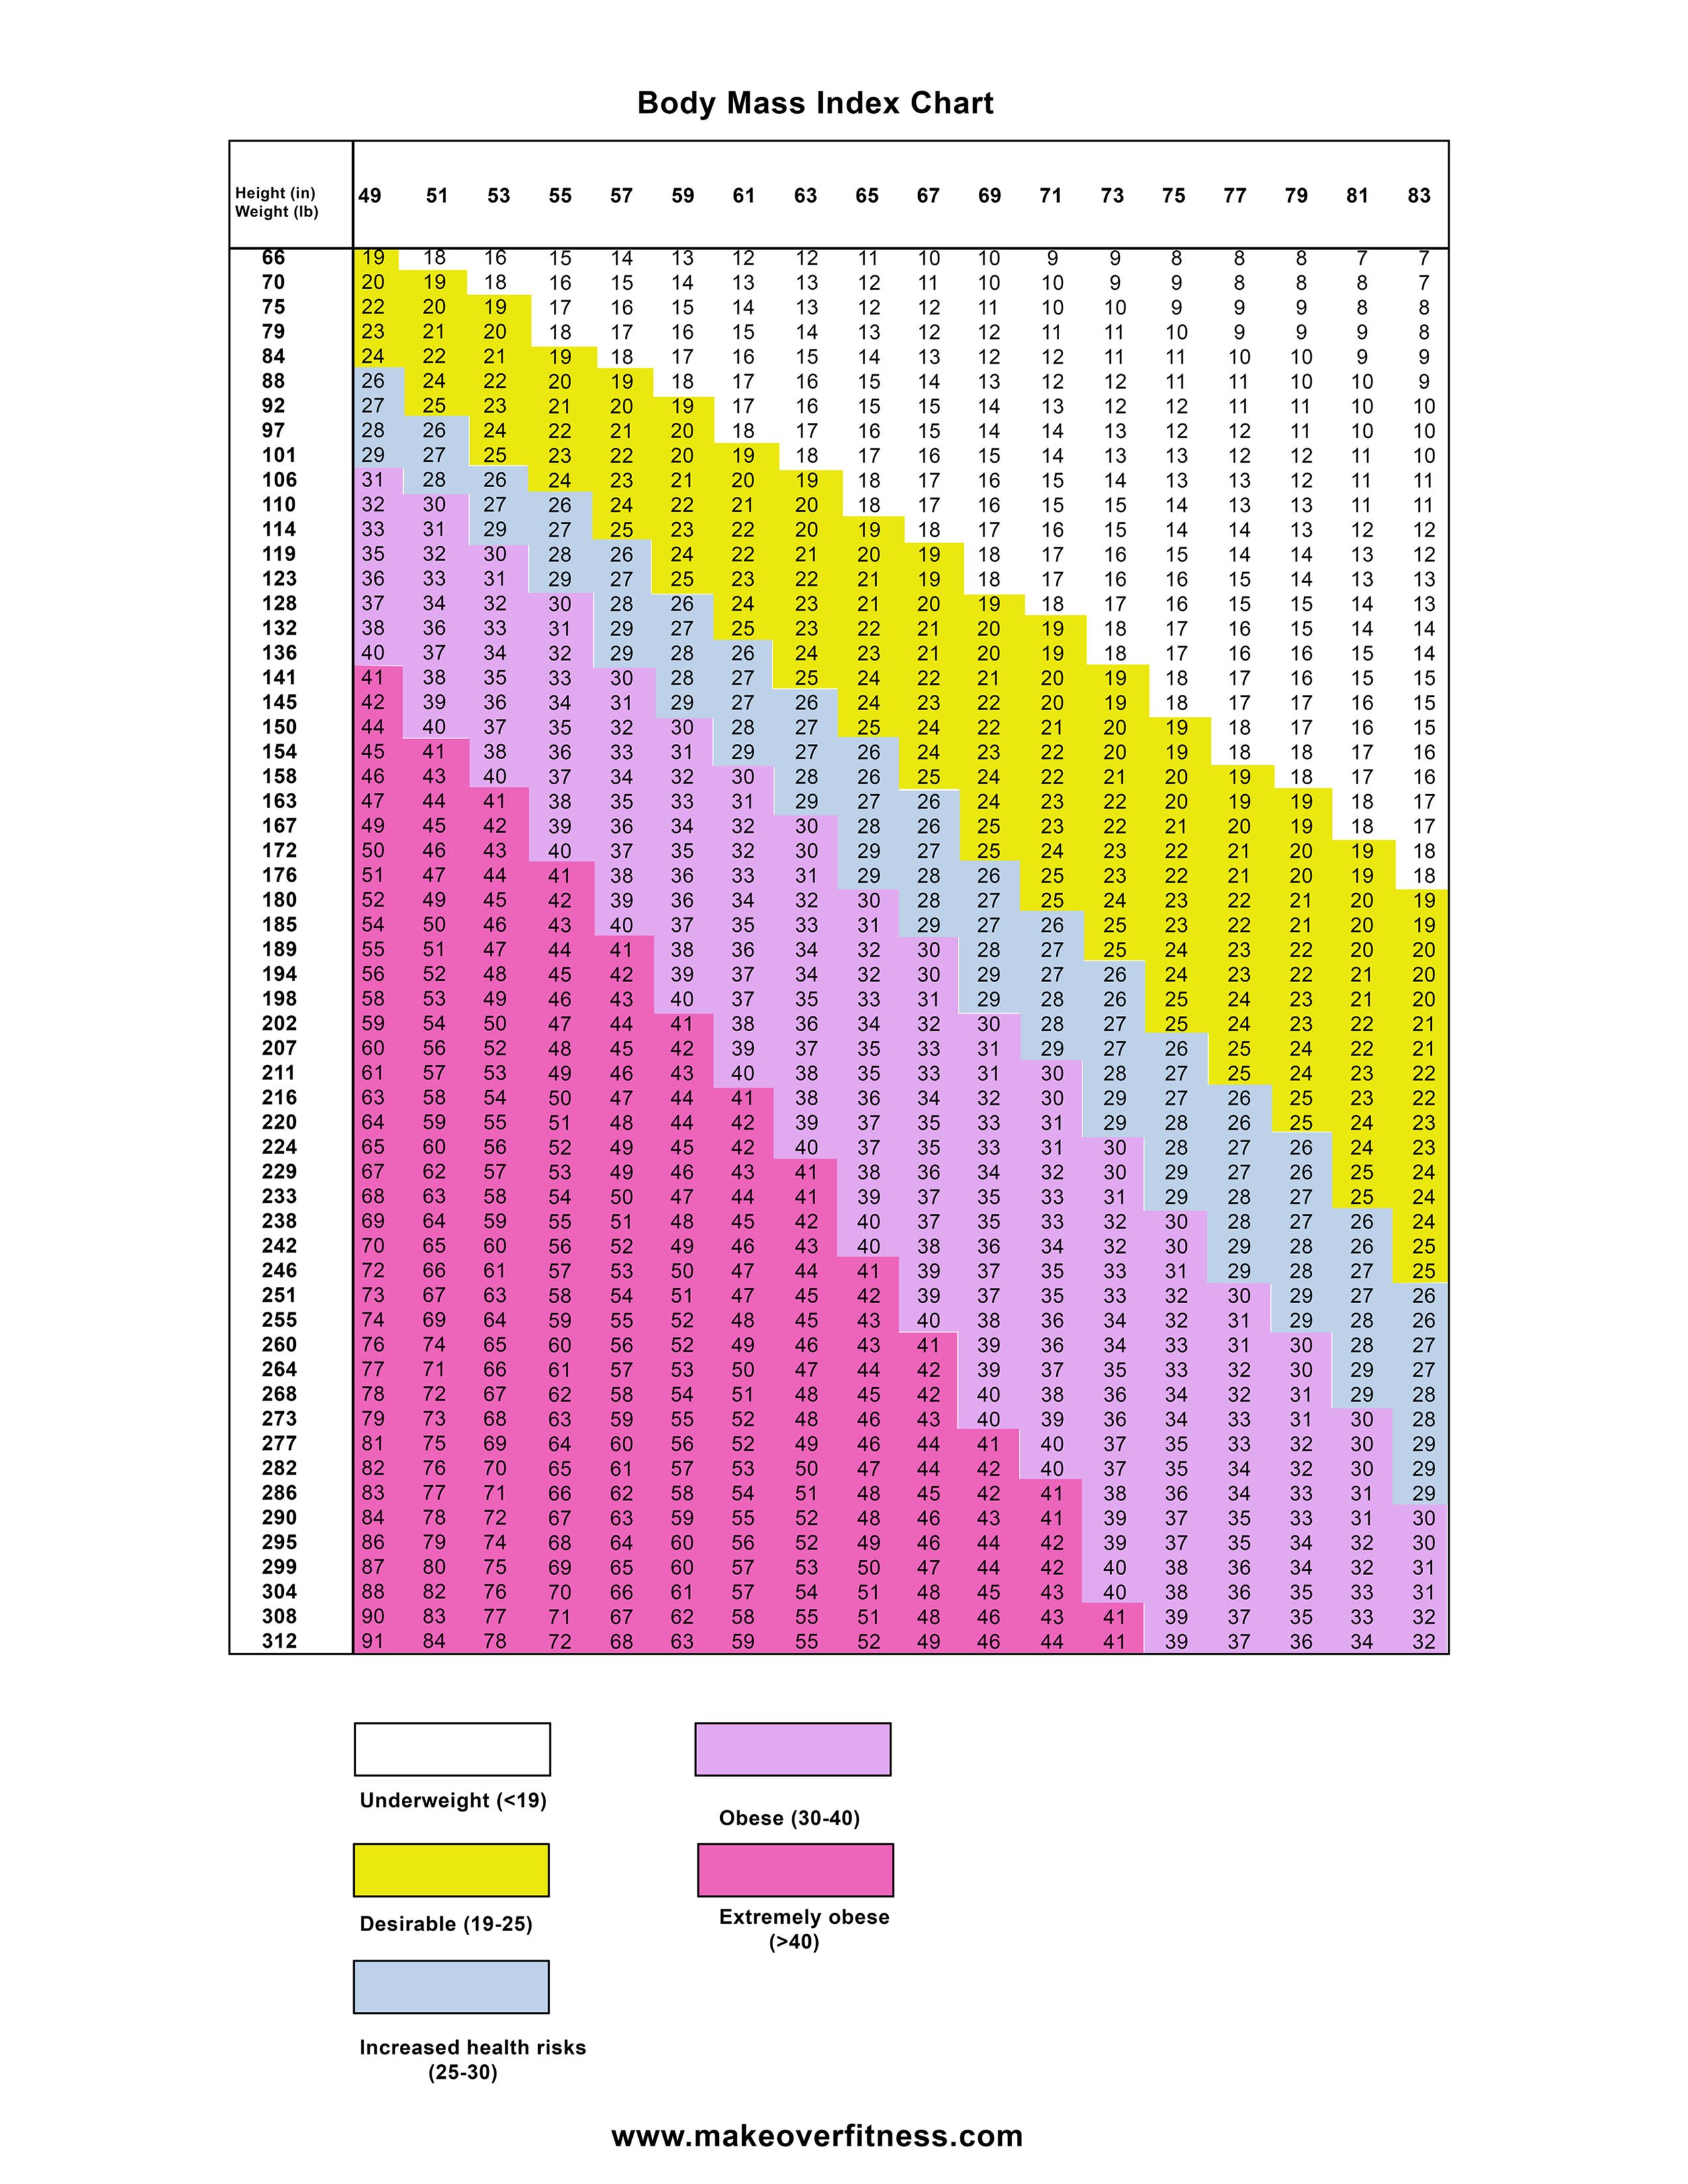 Body mass index chart you can download and print.